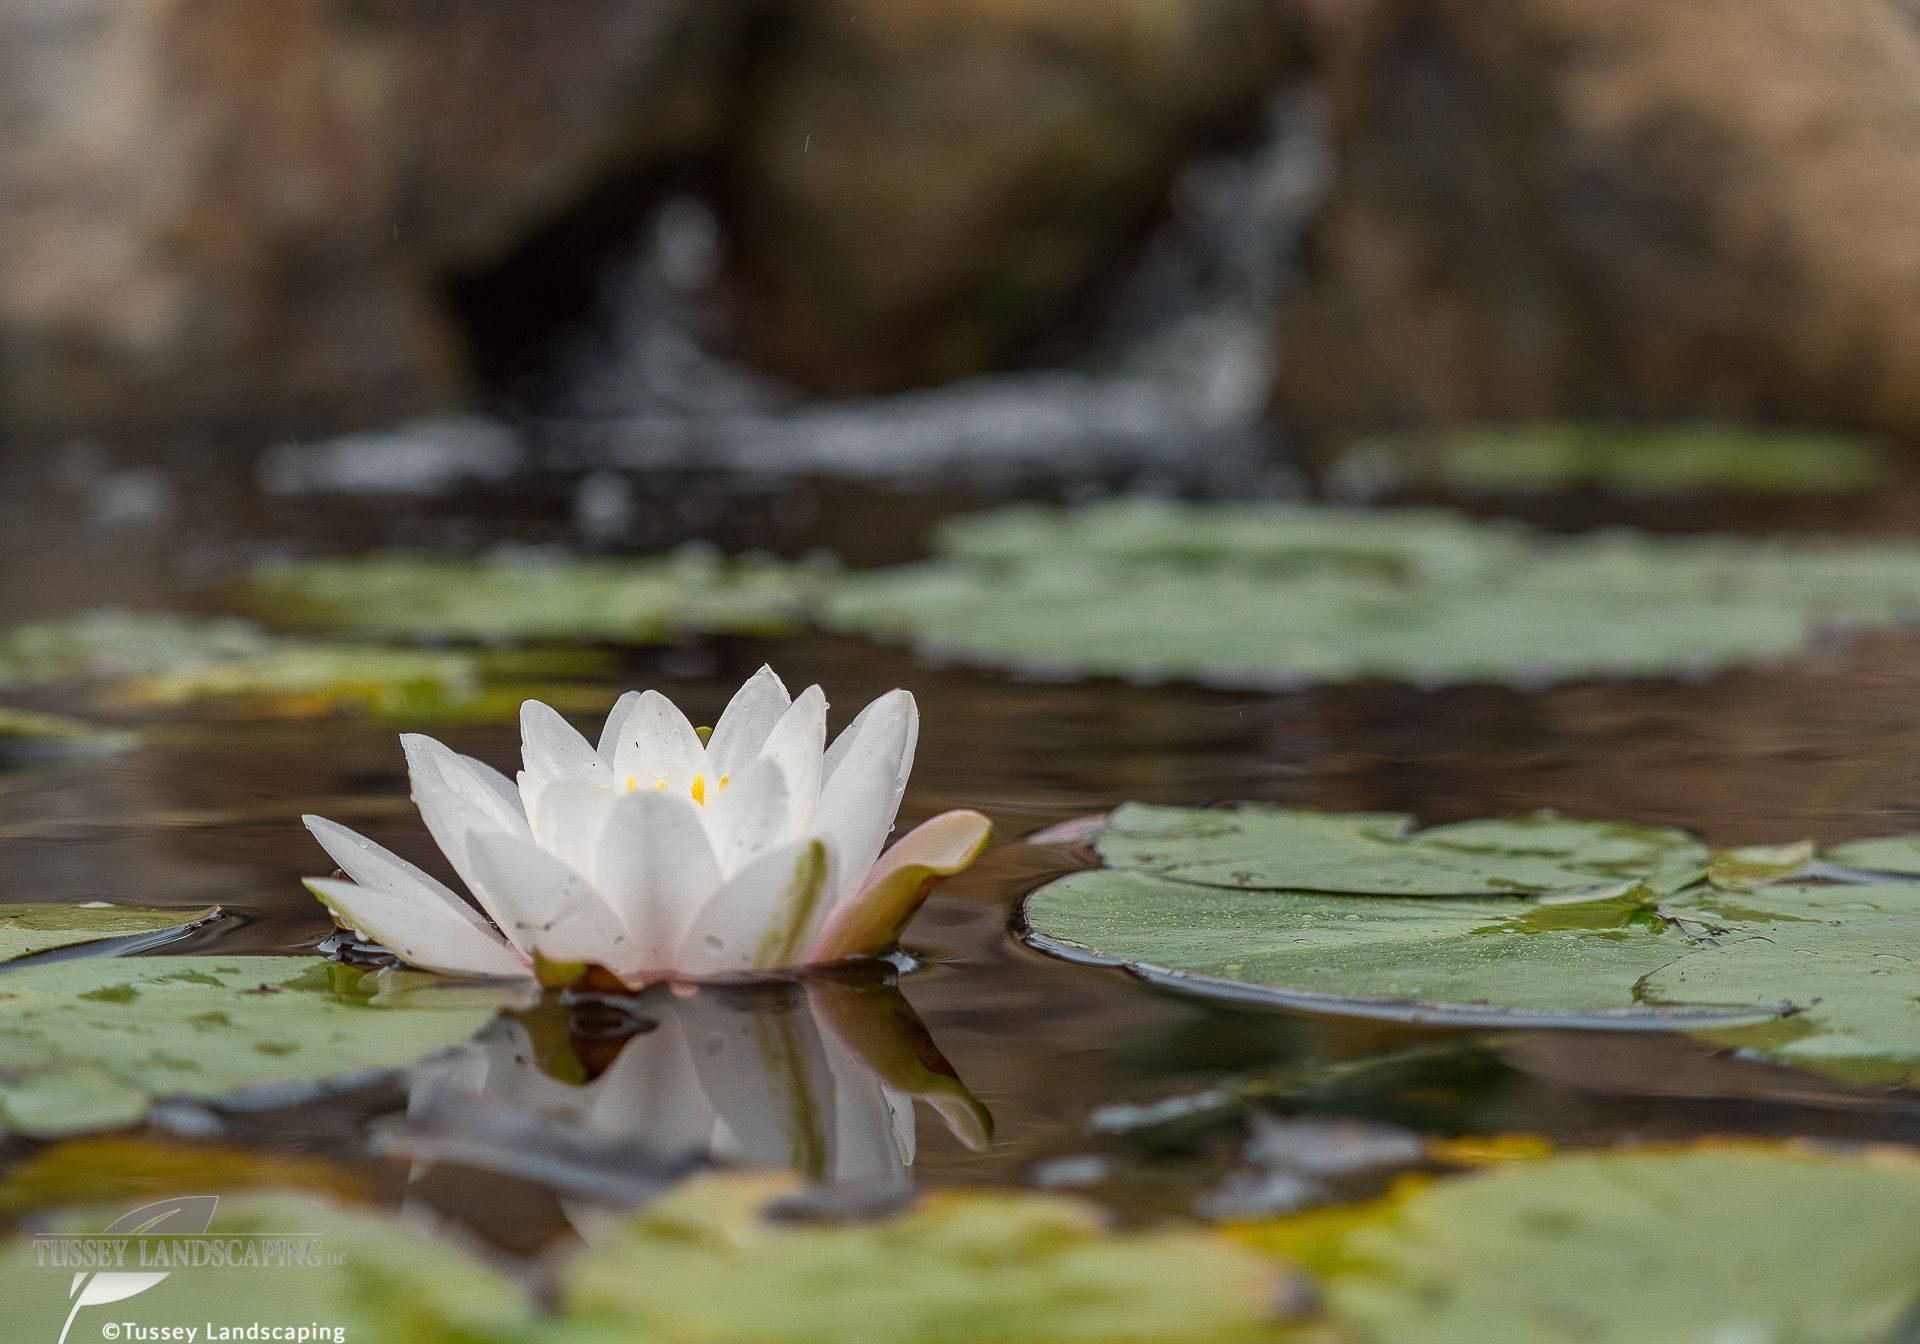 A white water lily floating in a pond.